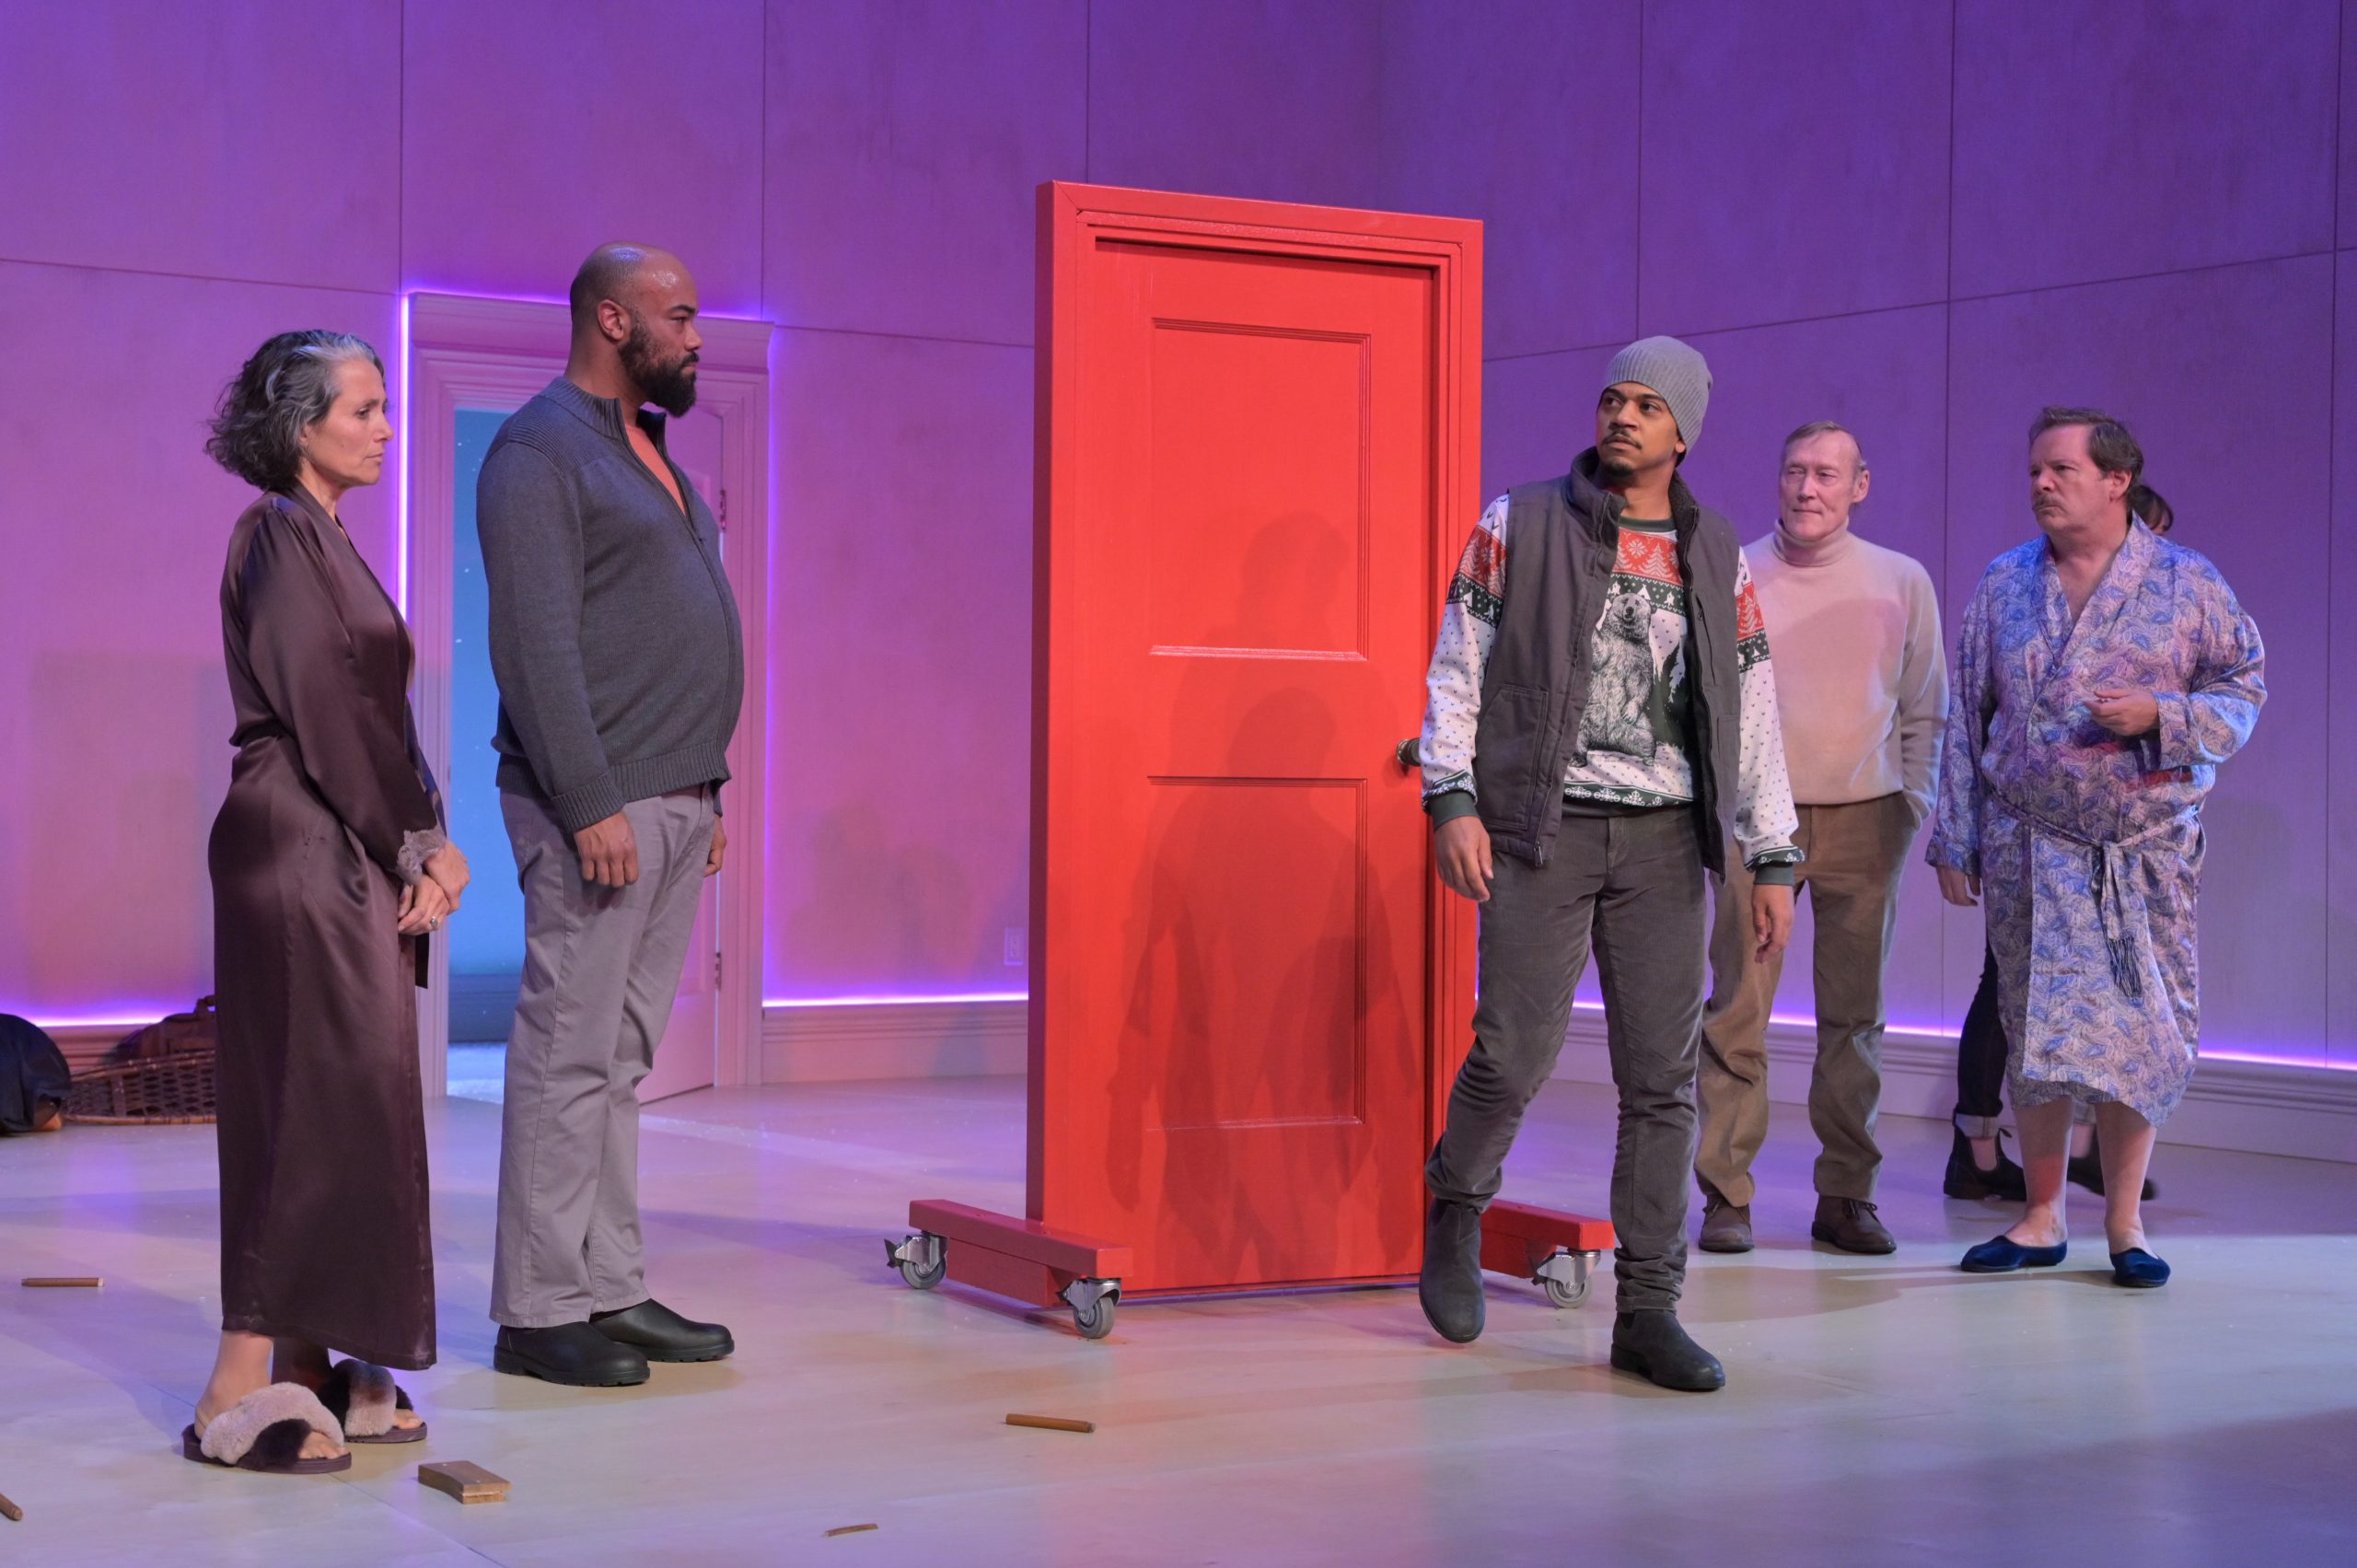 Nora el Samahy (Maria), David Ryan Smith (Edmund), Micah Peoples (Jonathan), James Carpenter (Frank), and Thomas Jay Ryan (Francois) in Berkeley Rep’s production of Charles L. Mee’s Wintertime, directed by Les Waters. The actors stand on stage surrounding a red door